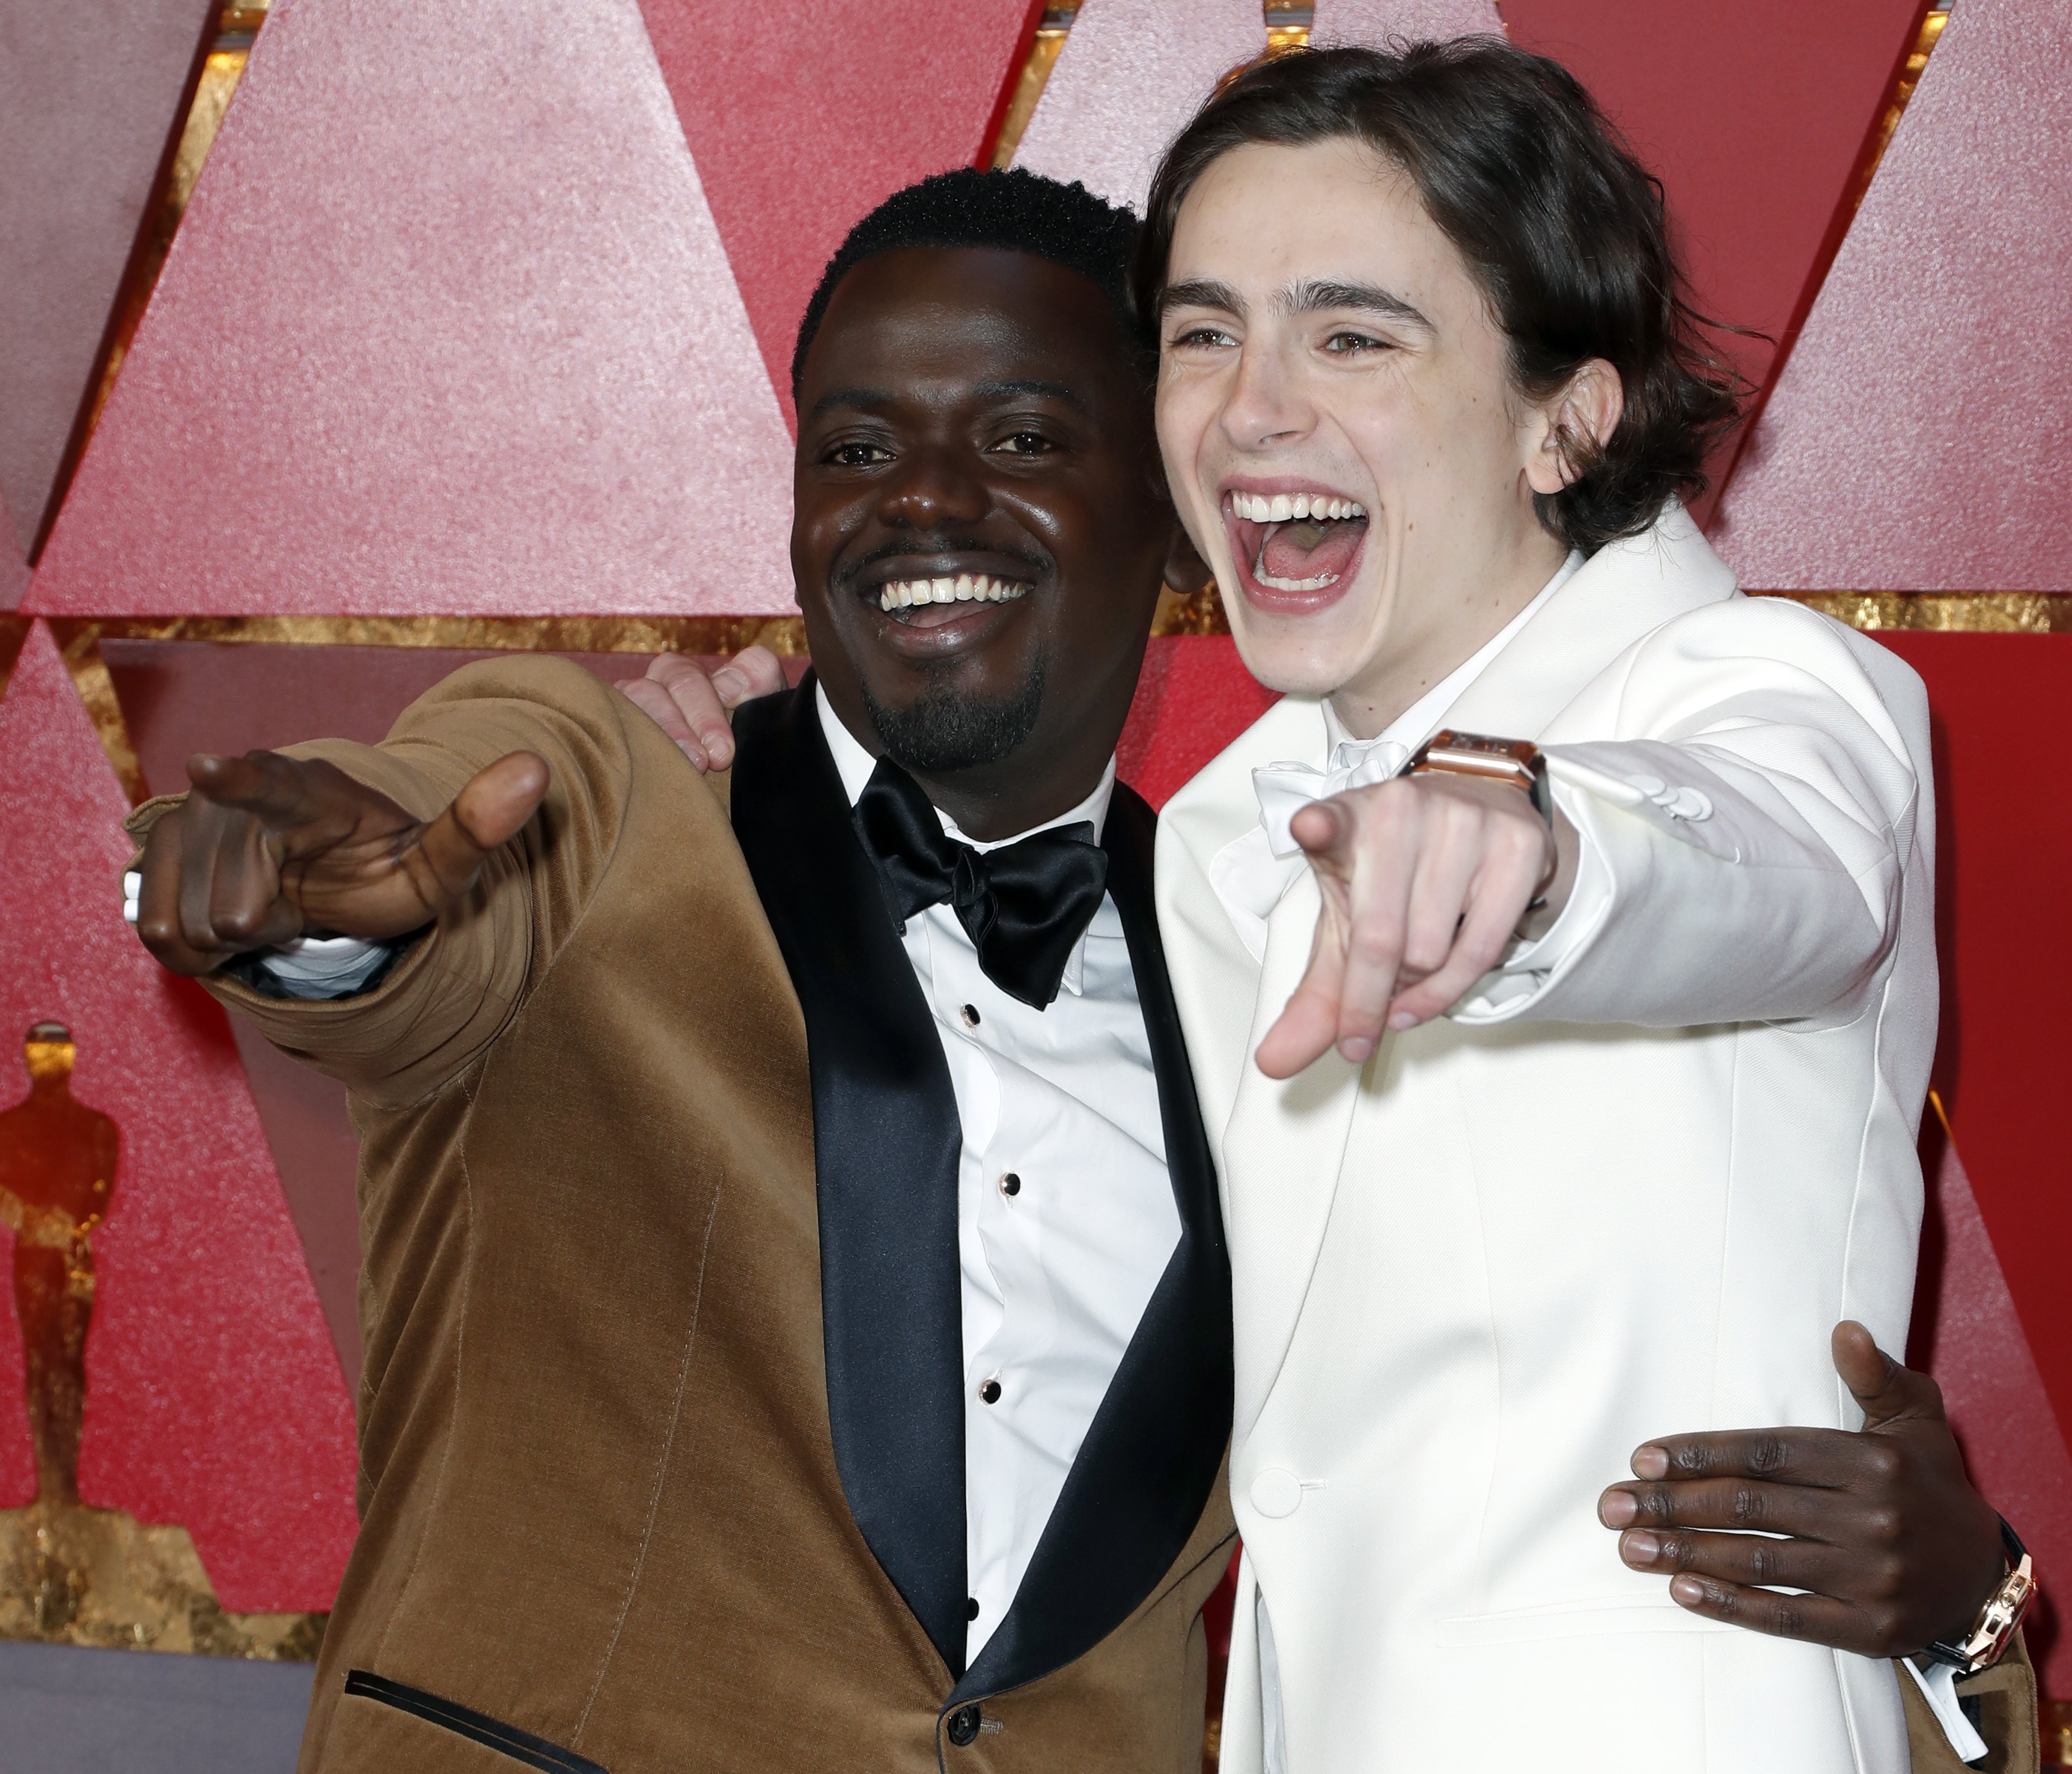 Best actor nominees Daniel Kaluuya (left) and Timothee Chalamet share a light moment on the red carpet. Photo: EPA